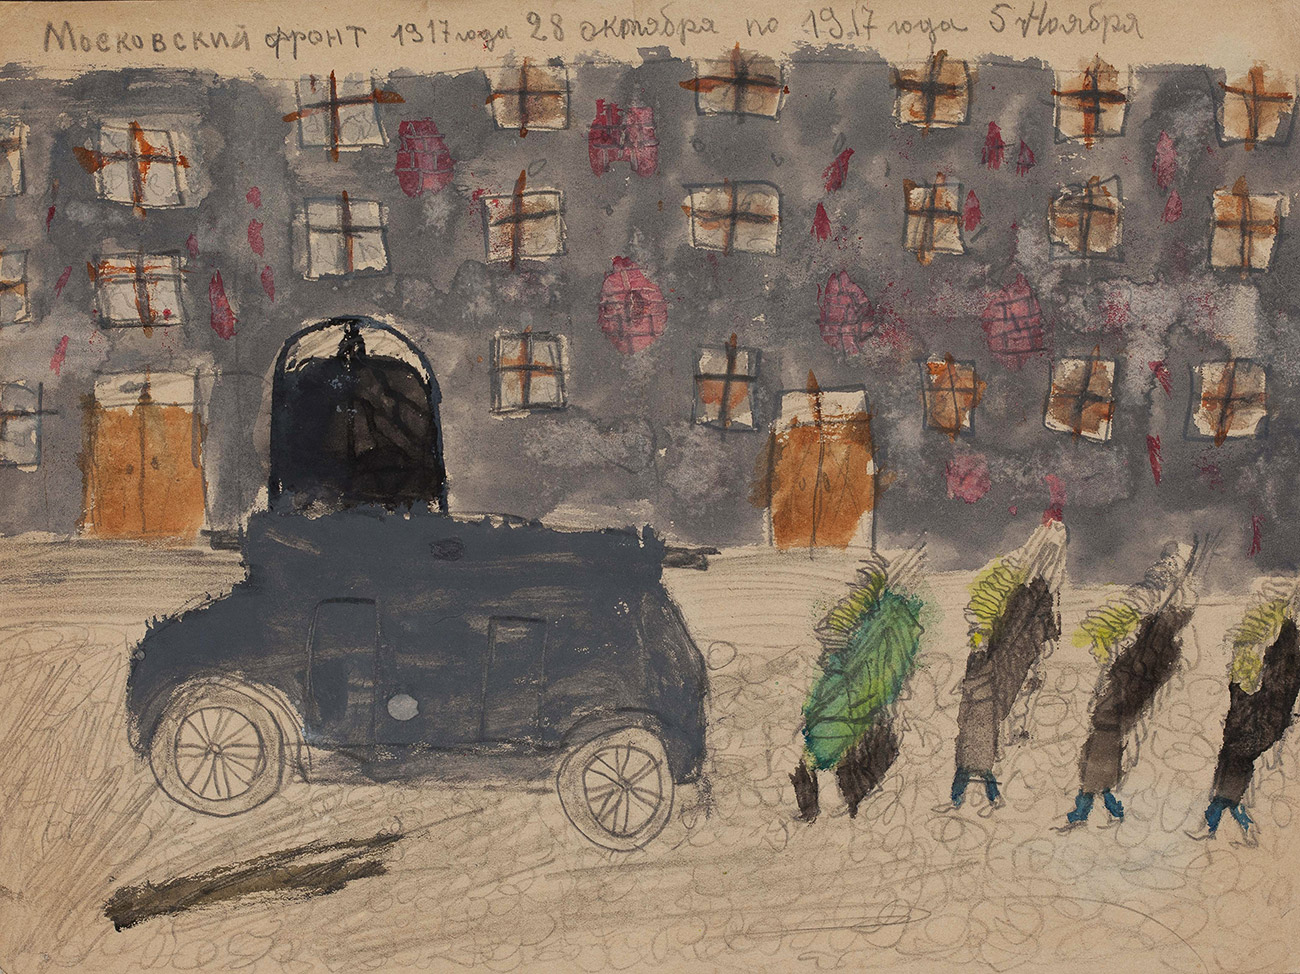 “Battle for Teatralny Square”, “Siege of a house” and “Shelling of the Kremlin” are just some of the titles from a series of drawings by children who witnessed of the revolutionary and post-revolutionary events of February-November 1917 in Moscow. //  “The Moscow Front: Oct. 28-Nov. 5, 1917”, November 1917